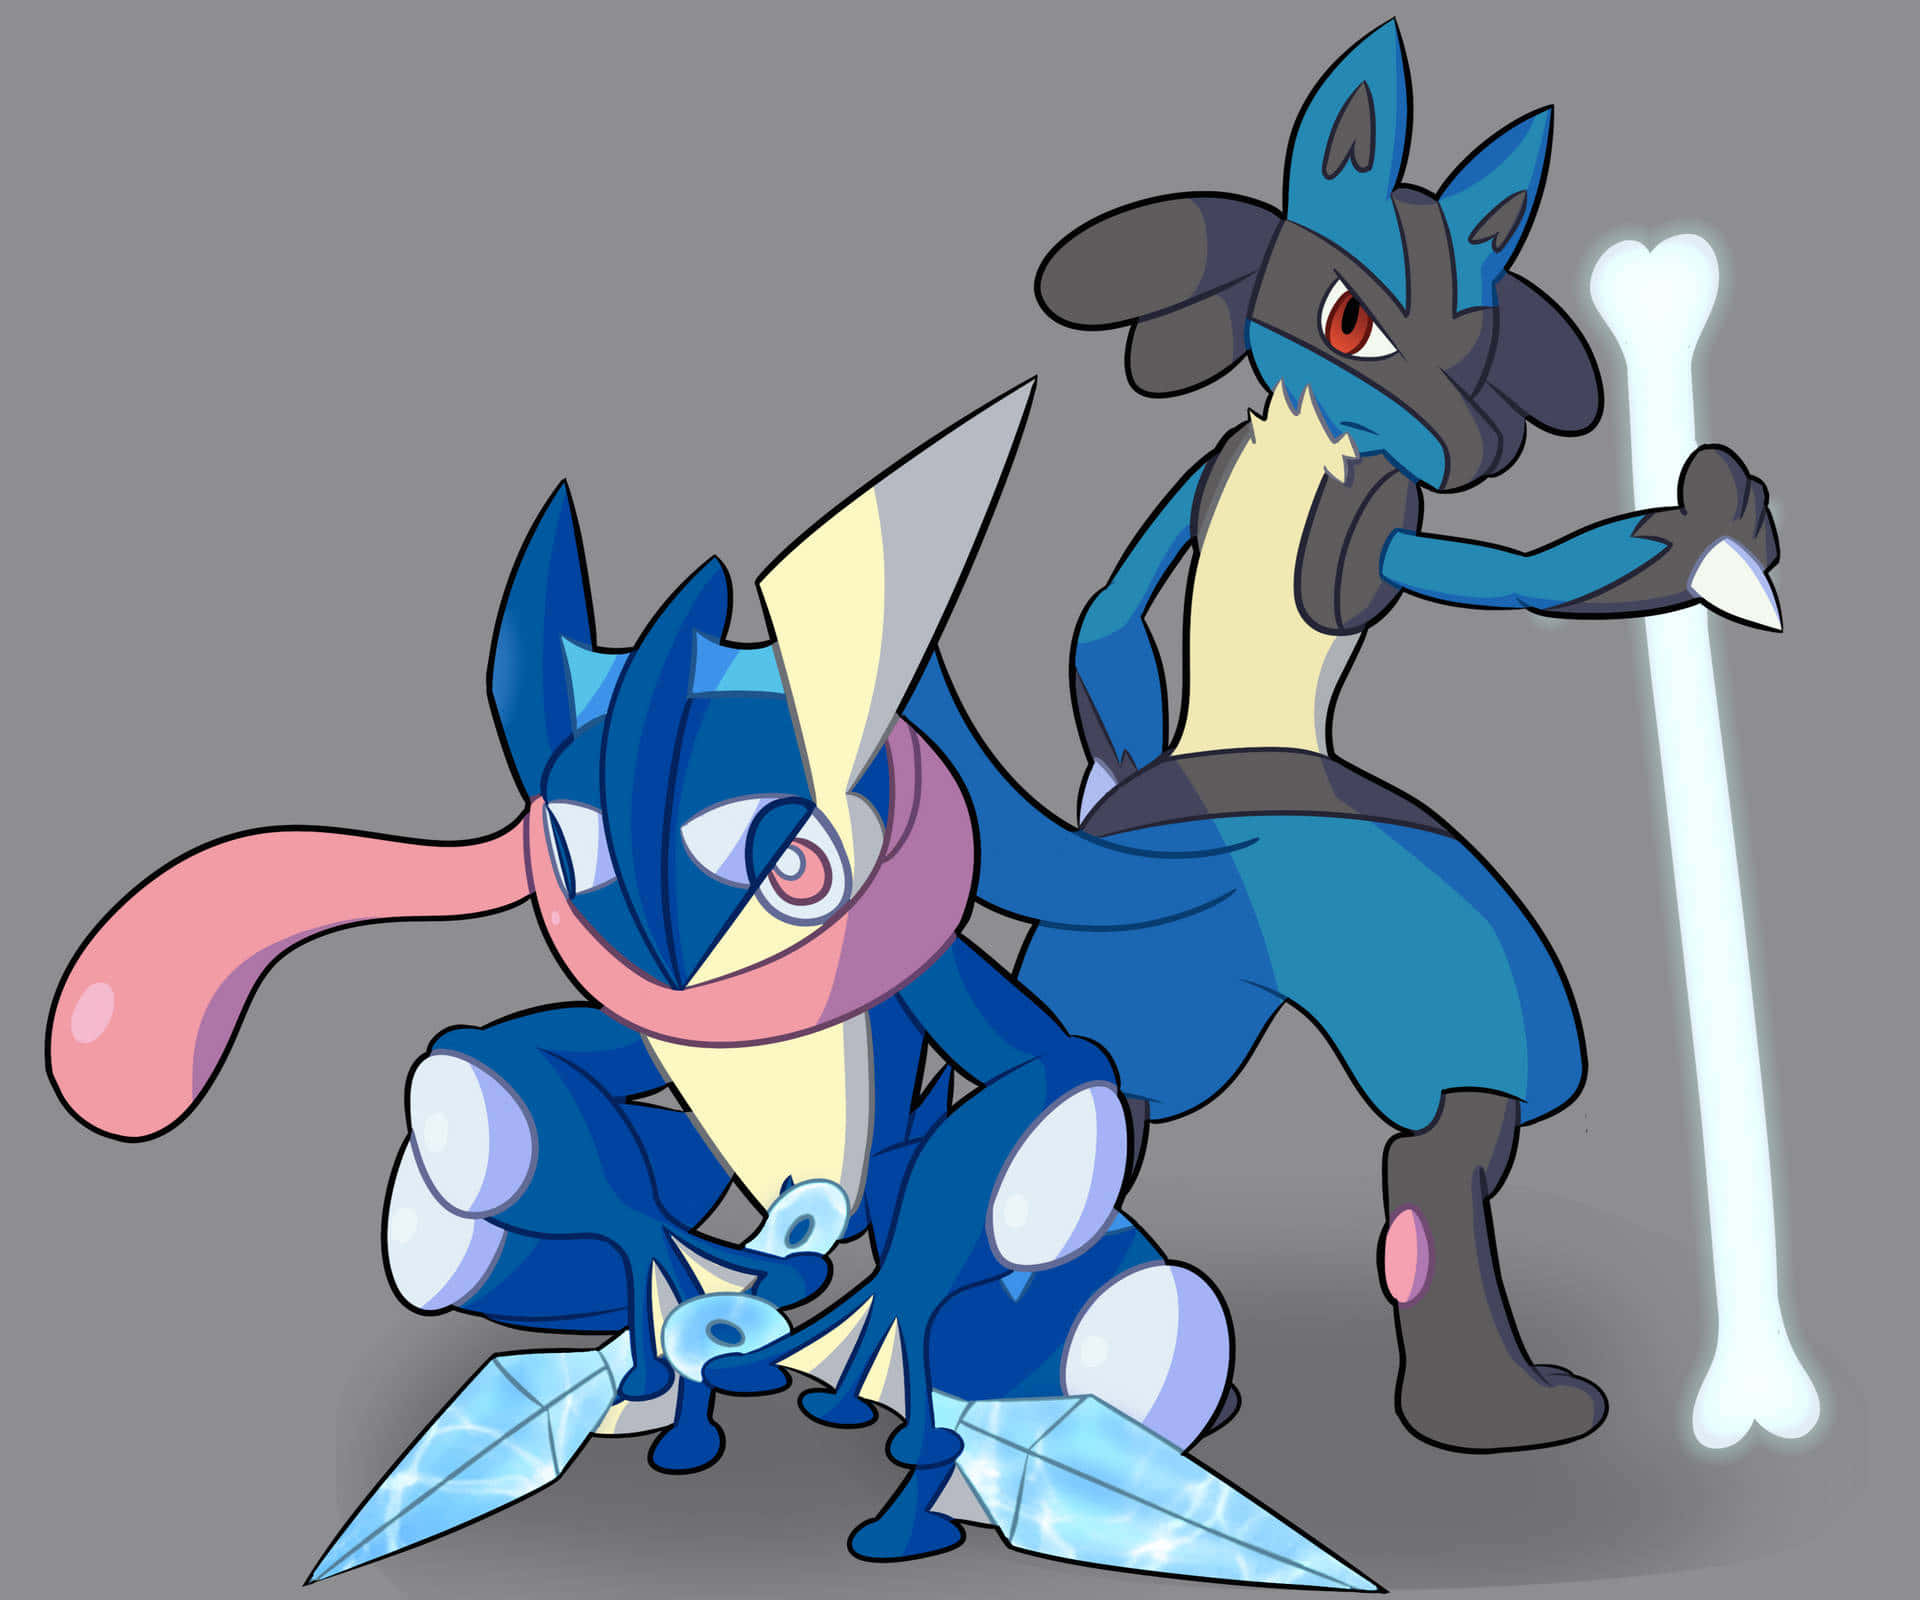 "Tap into your inner strength with Lucario!"